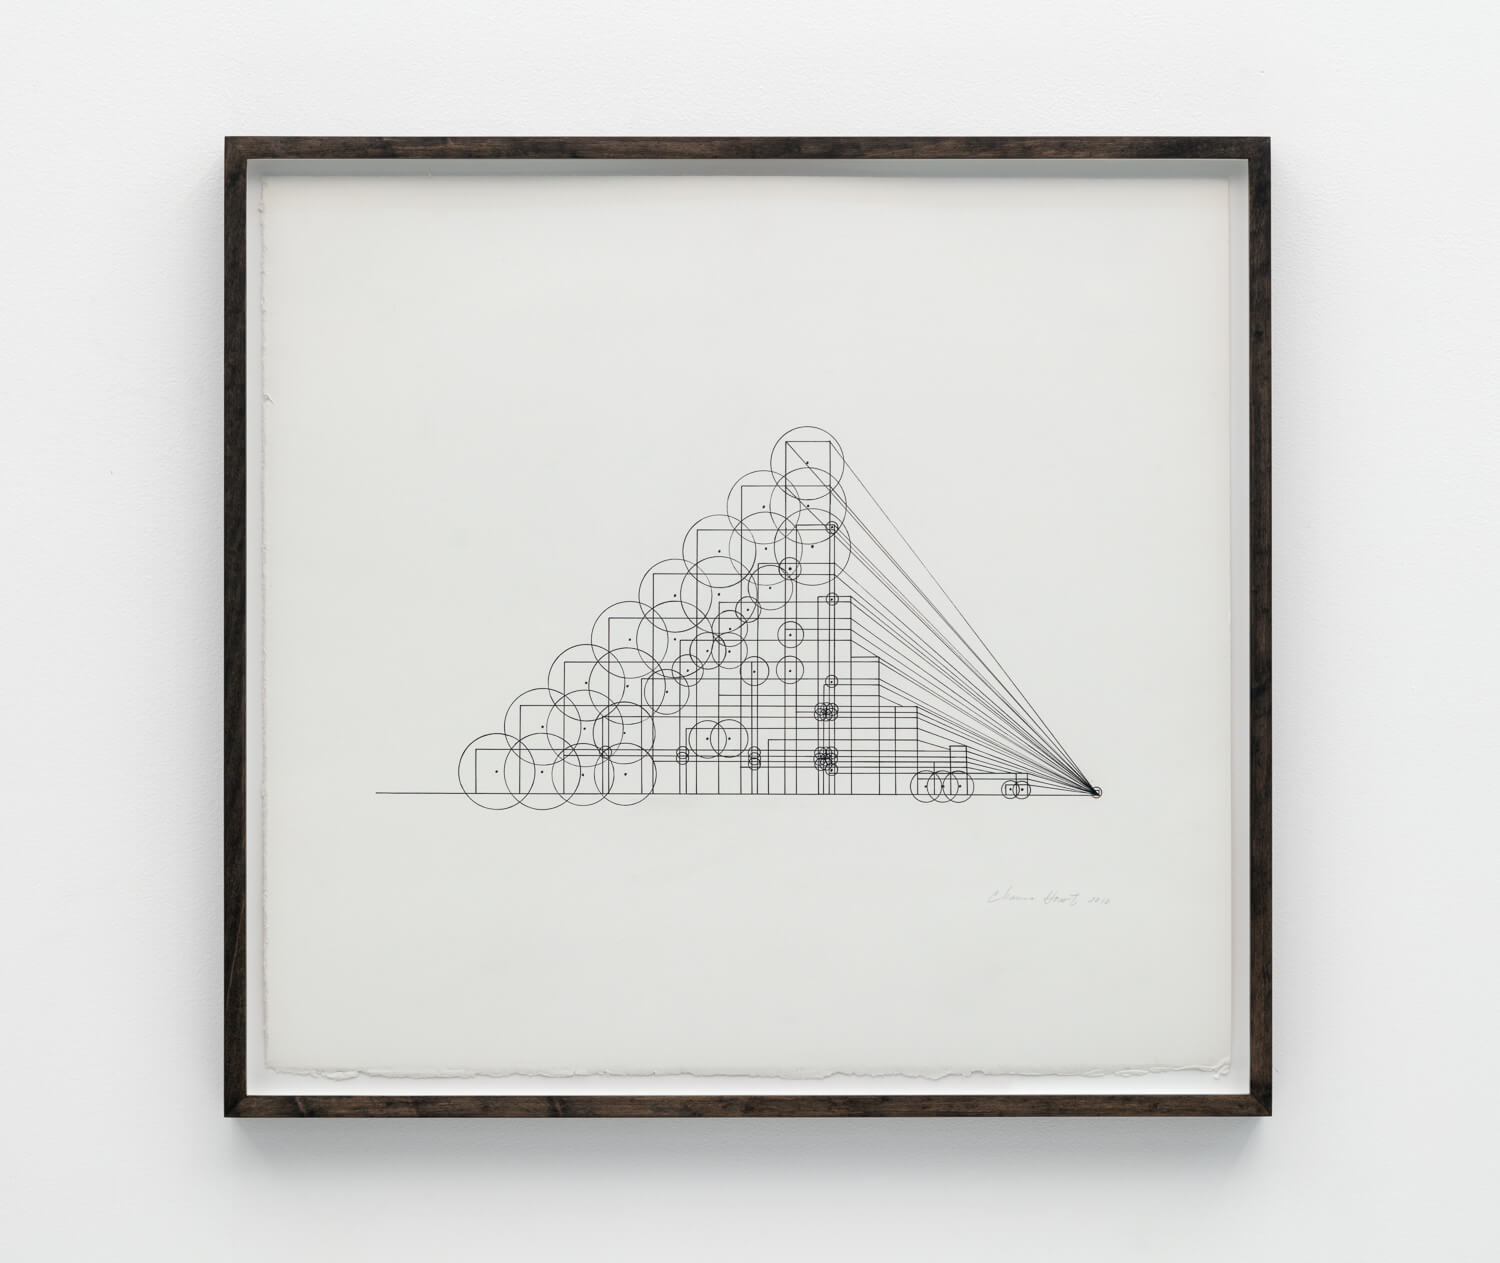 Horwitz, Untitled Structure, 2010 (CH 10.005)(#278)